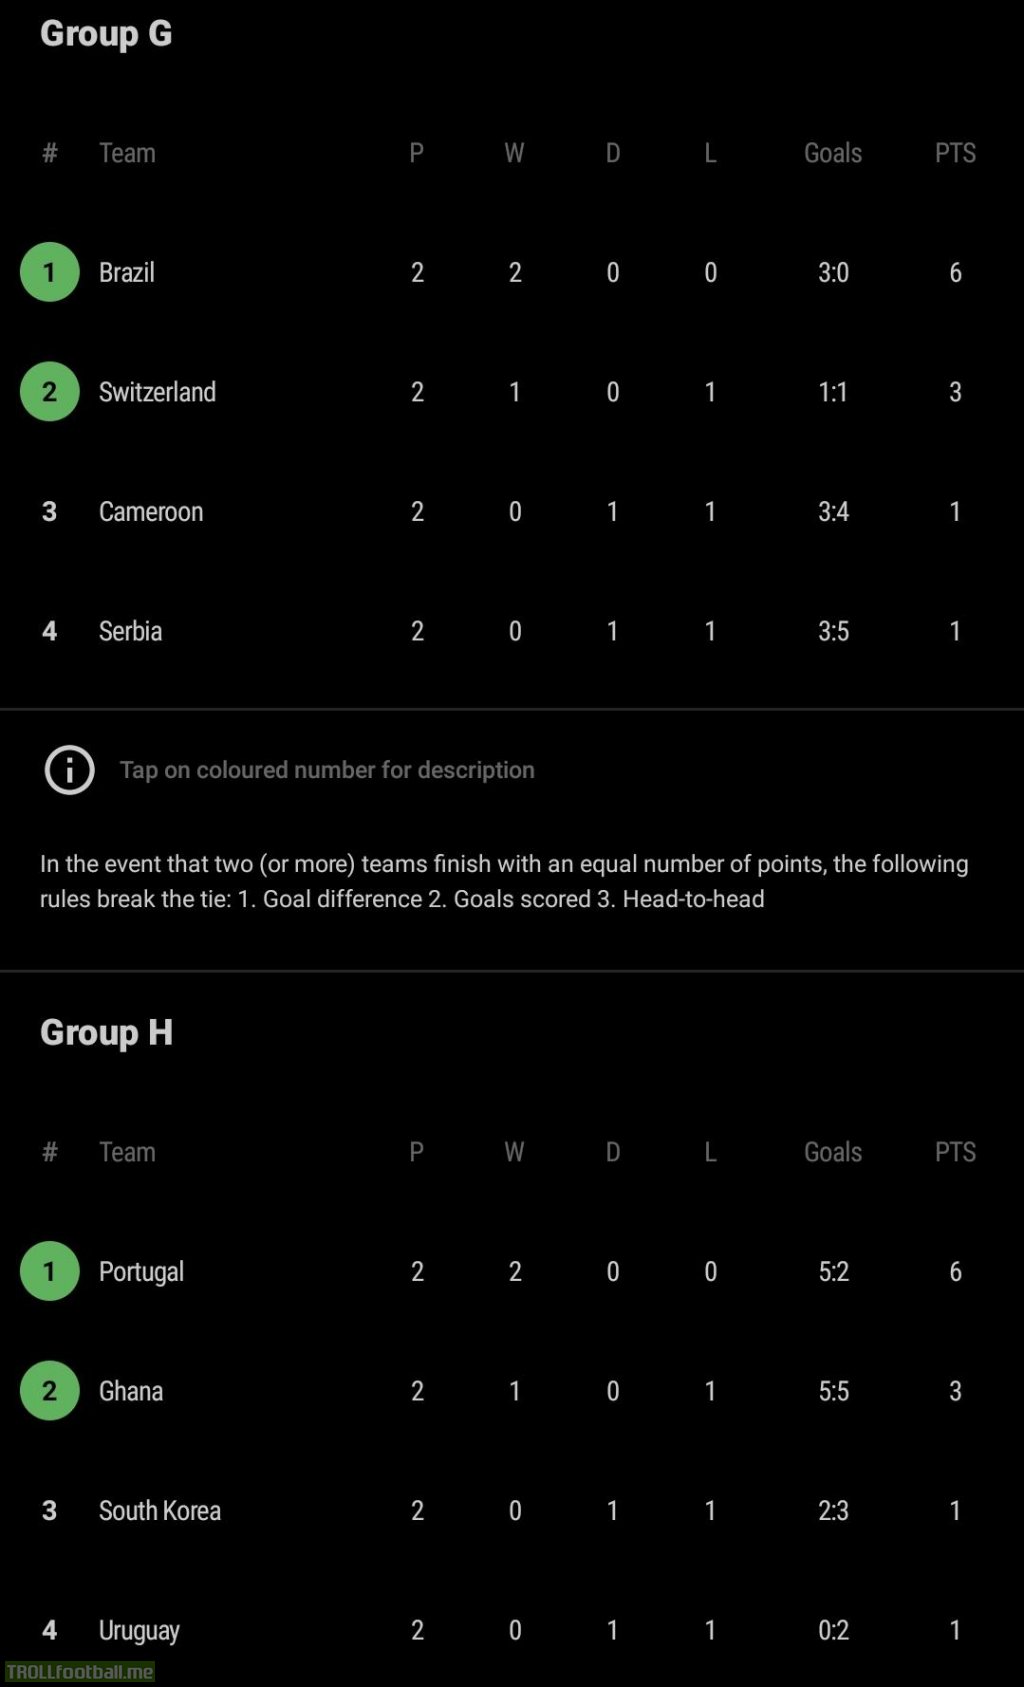 FIFAWC22 - Group G and H similarities